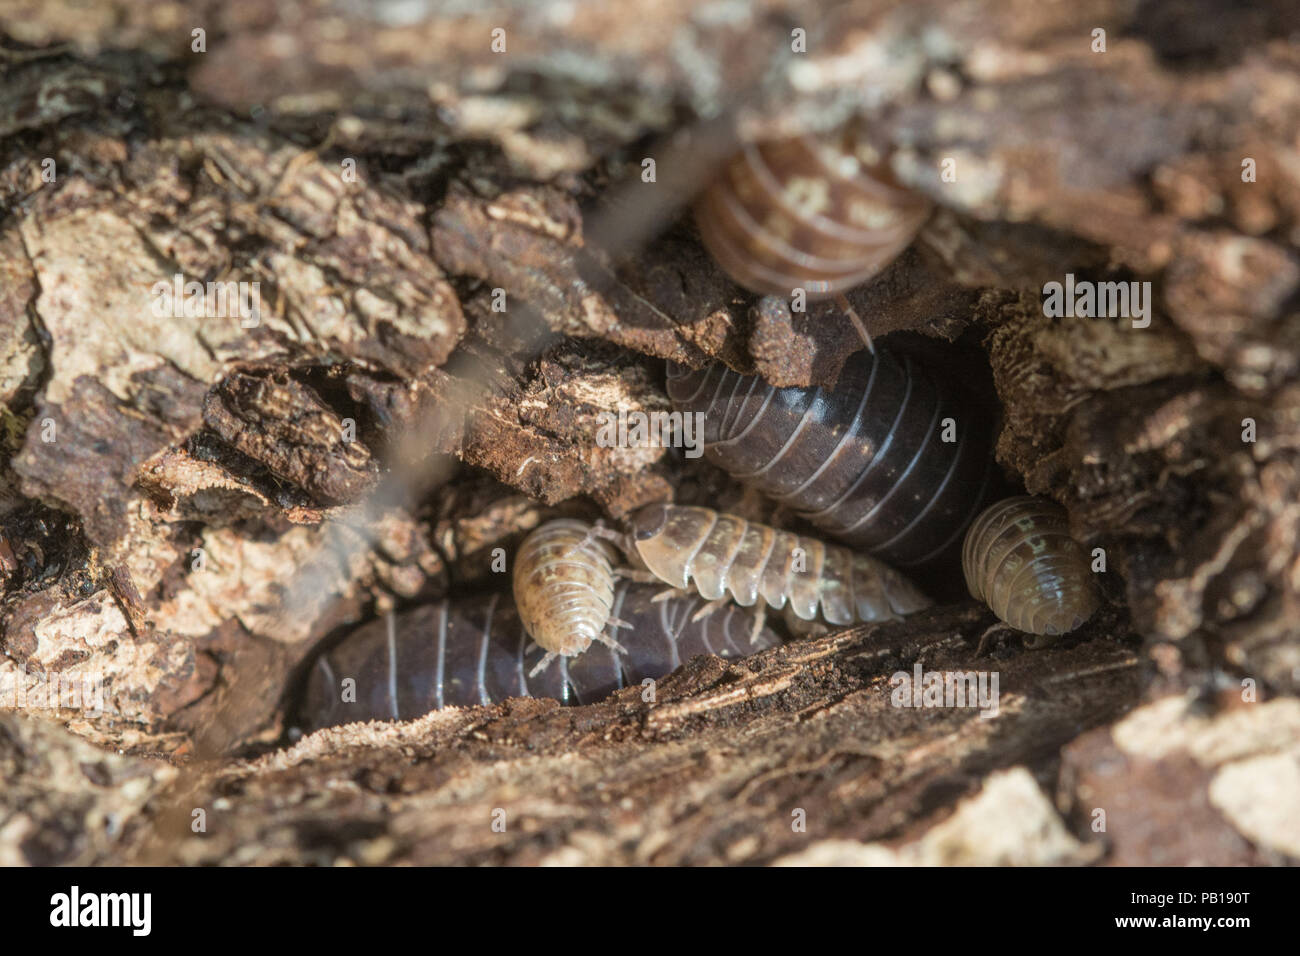 Woodlice, adults and young, in a crevice in a rotting log Stock Photo